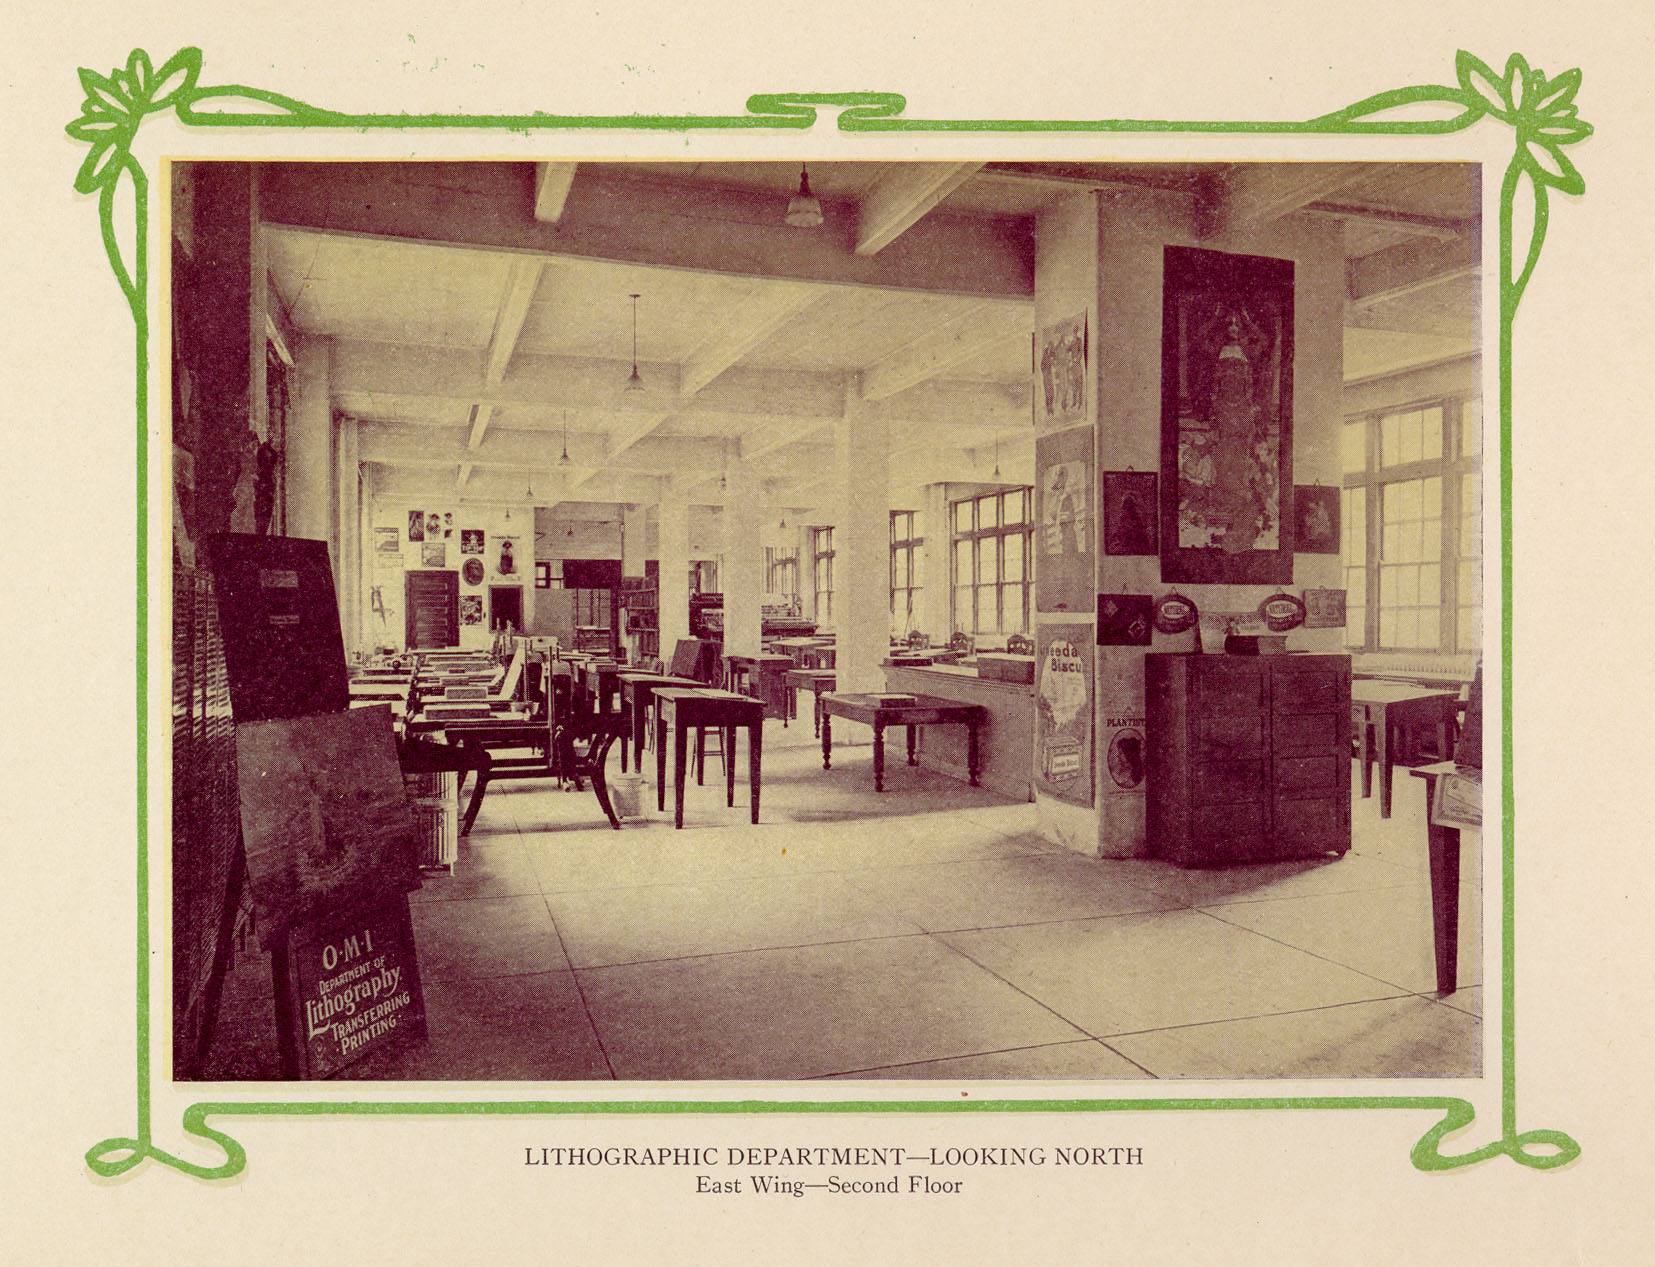 View of classroom where lithography was taught